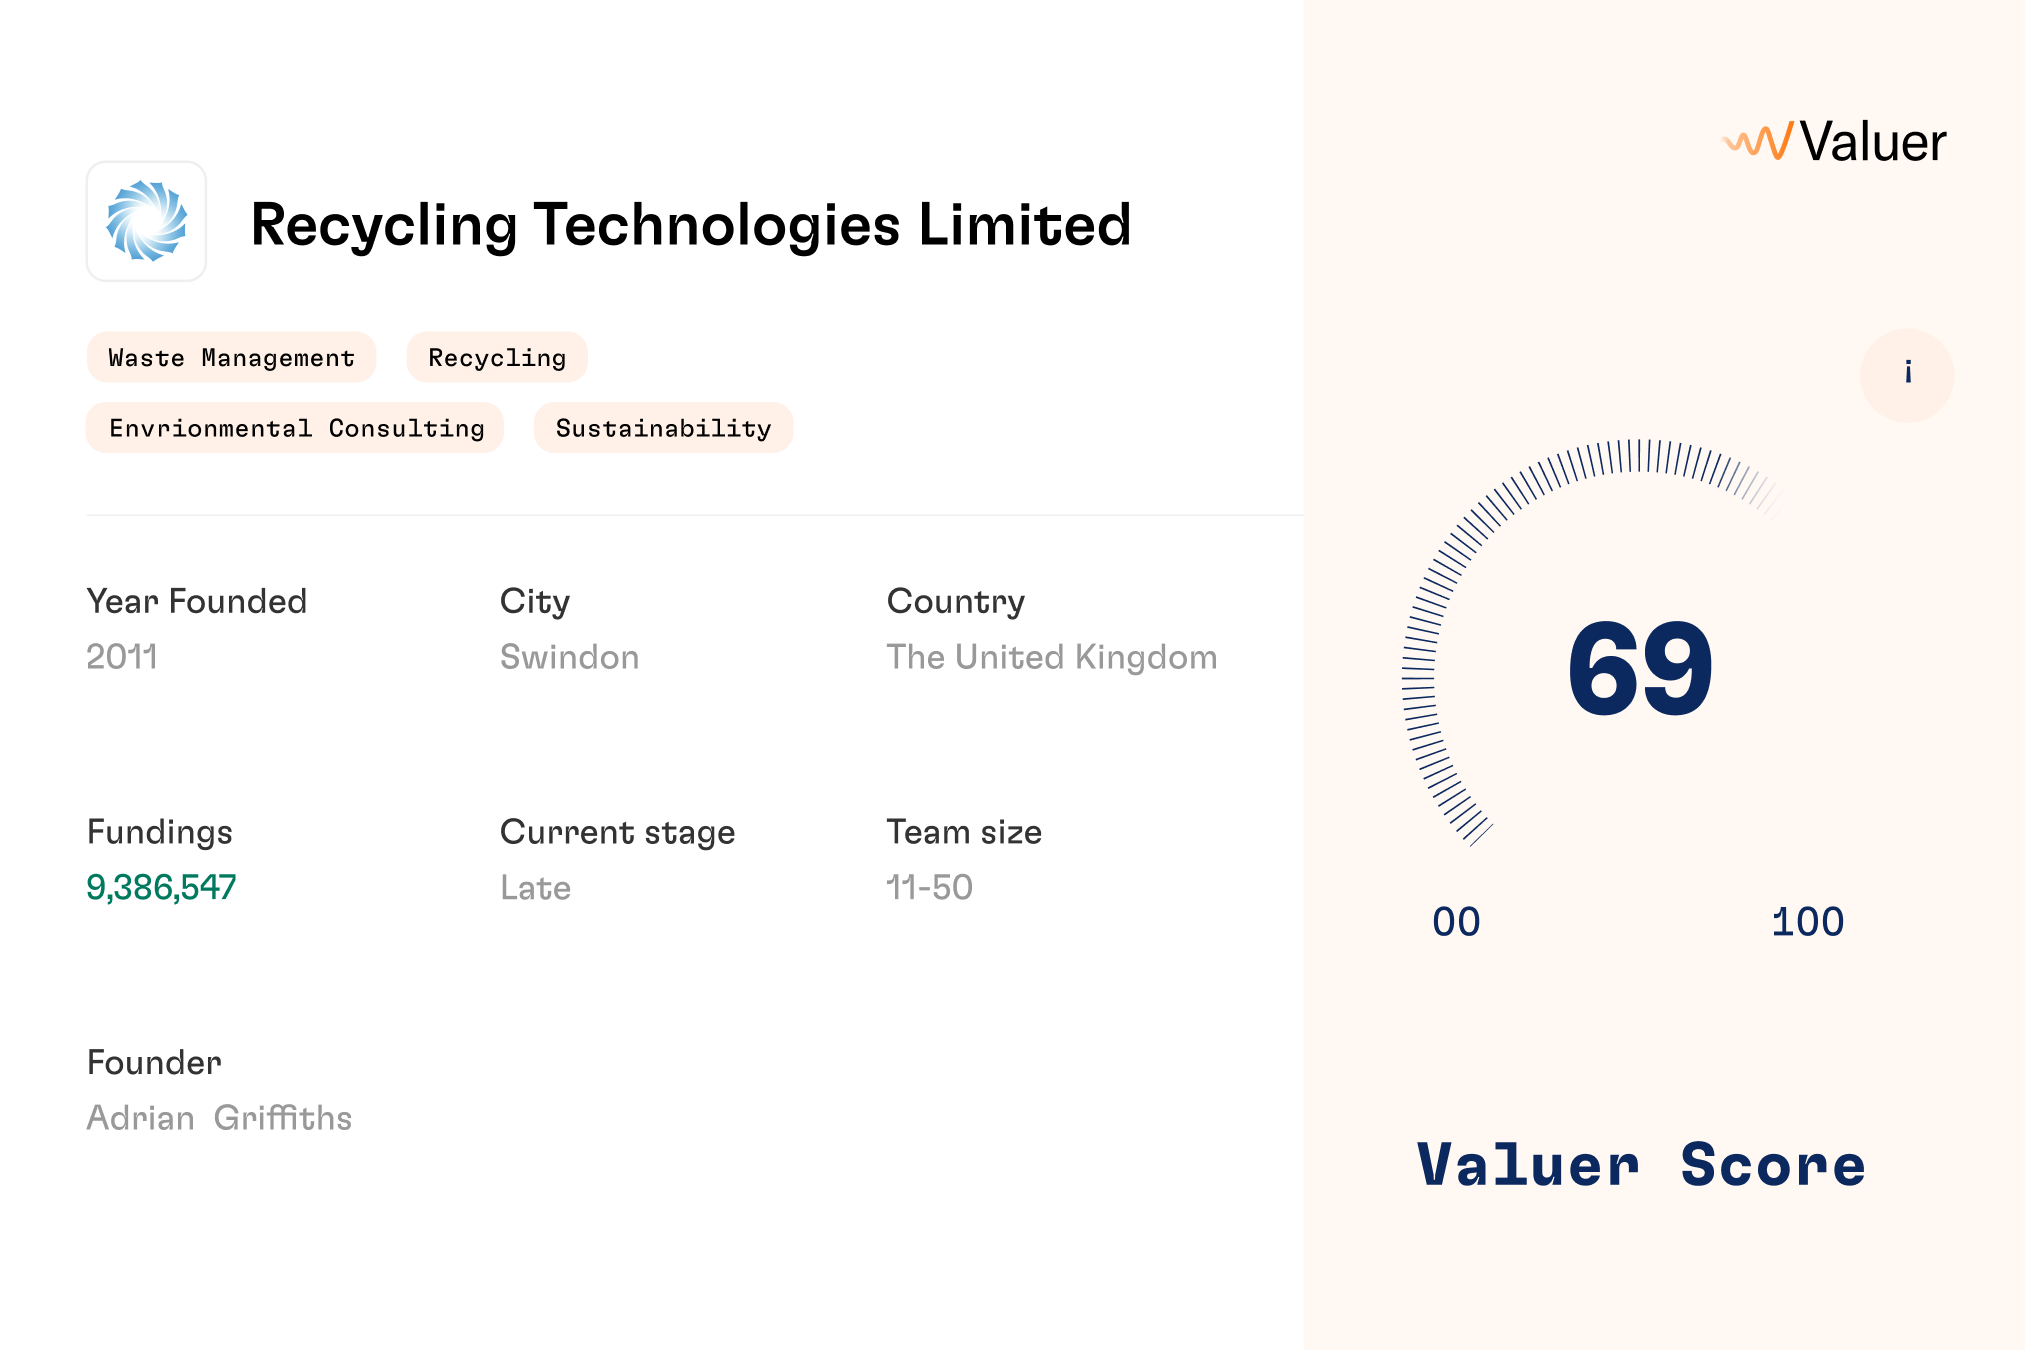 Recycling Technologies Limited